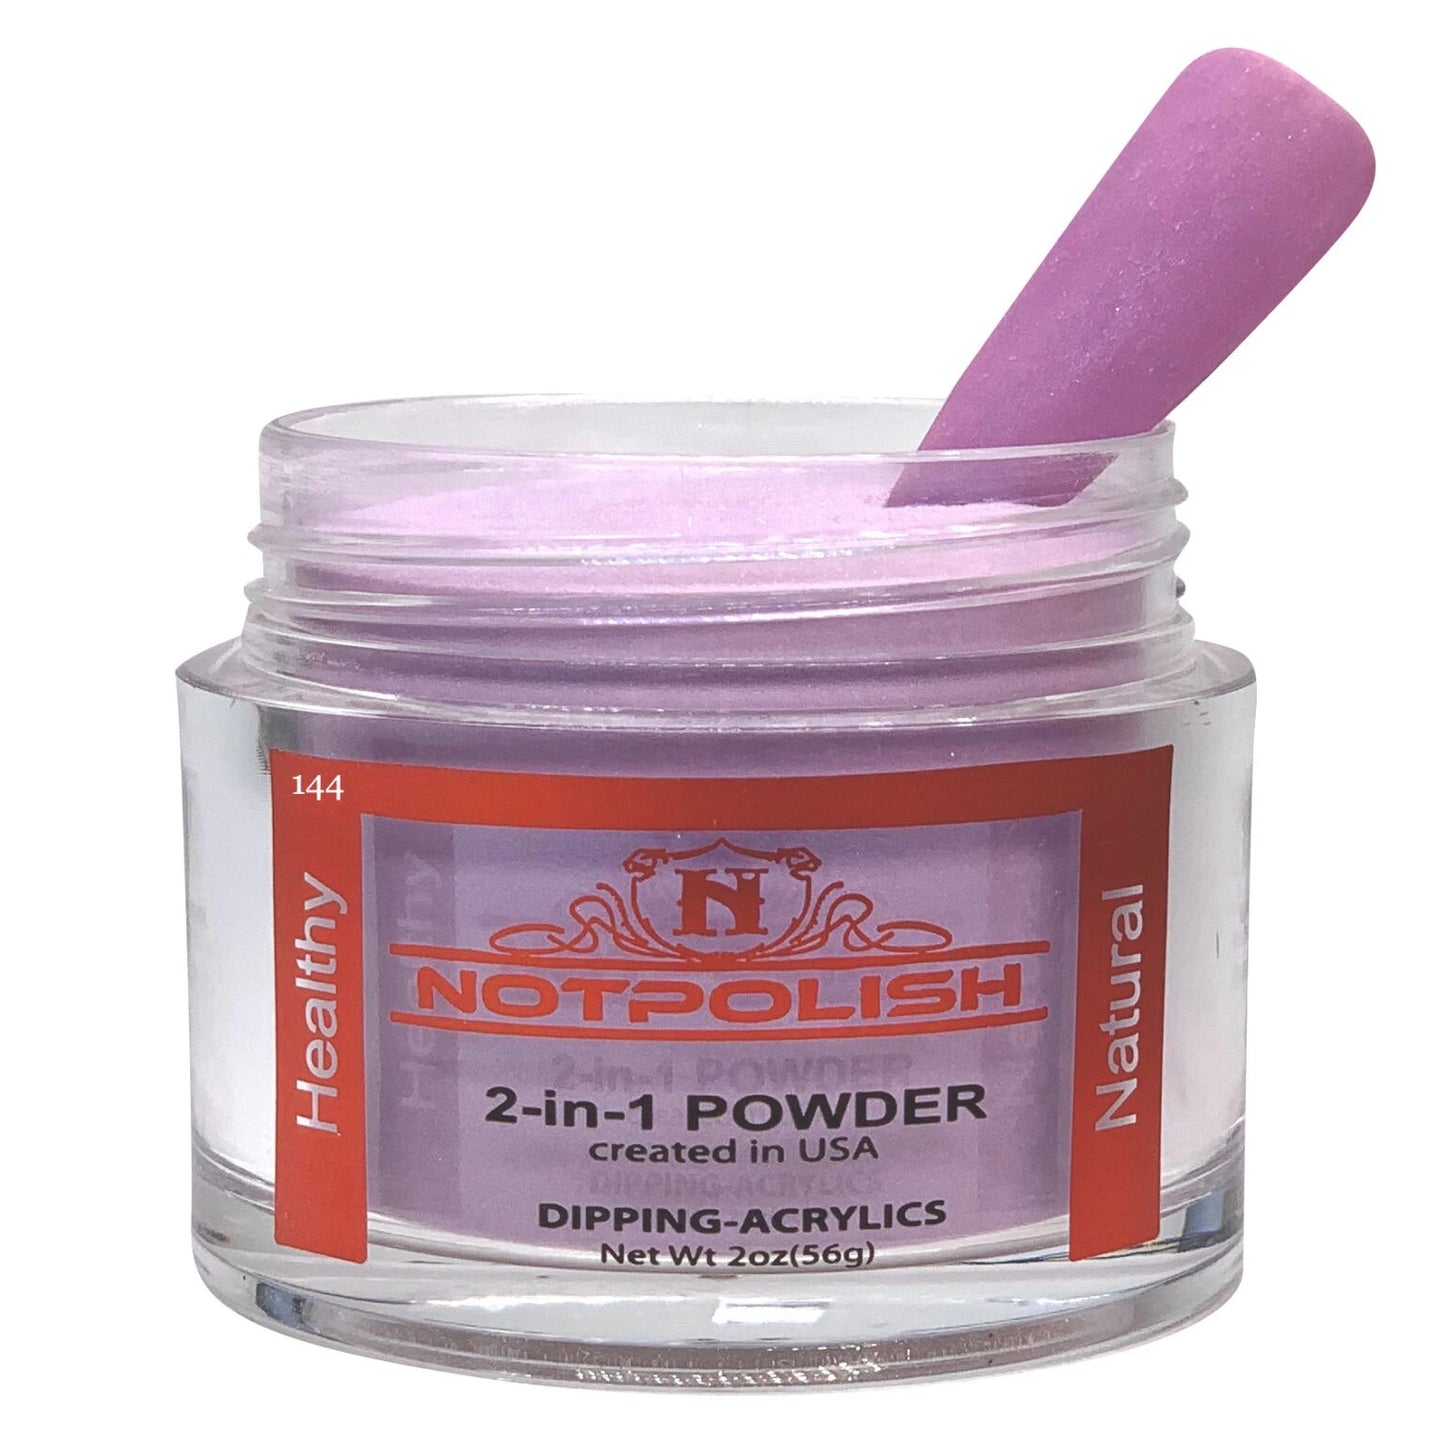 A product so rich and silky, NotPolish 2 in 1 Powders spread on like butter and set like hard candy. Our highly pigmented powder consistently produces the same HD results and yields a larger bead for easy application. The choice of Dipping for a sugared look or Dabbing leaves limitless possibilities to what you can create.